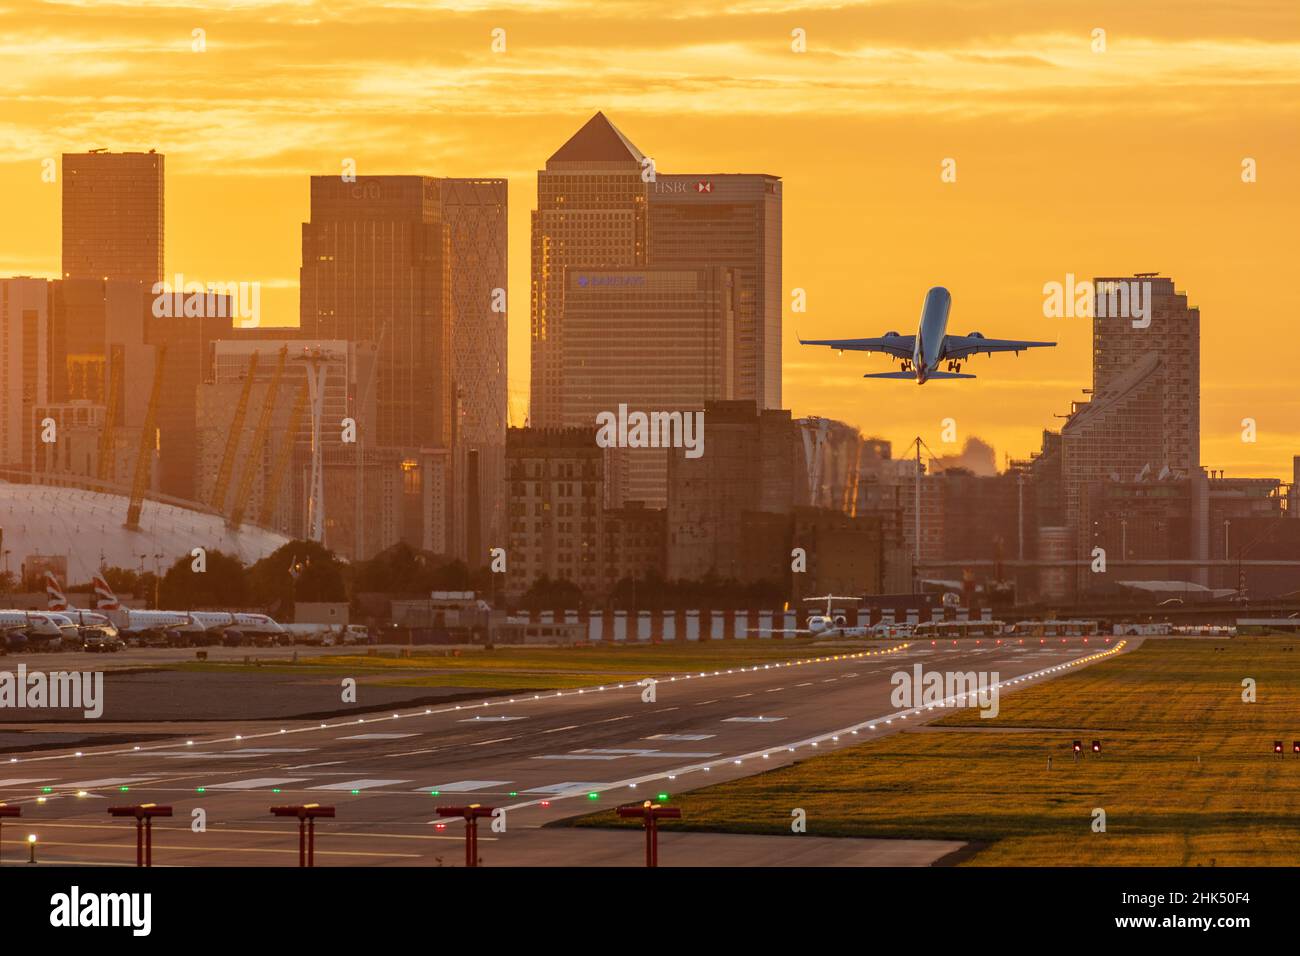 Aircraft taking off from London City Airport at sunset, with Canary Wharf and O2 Arena in background, London, England, United Kingdom, Europe Stock Photo